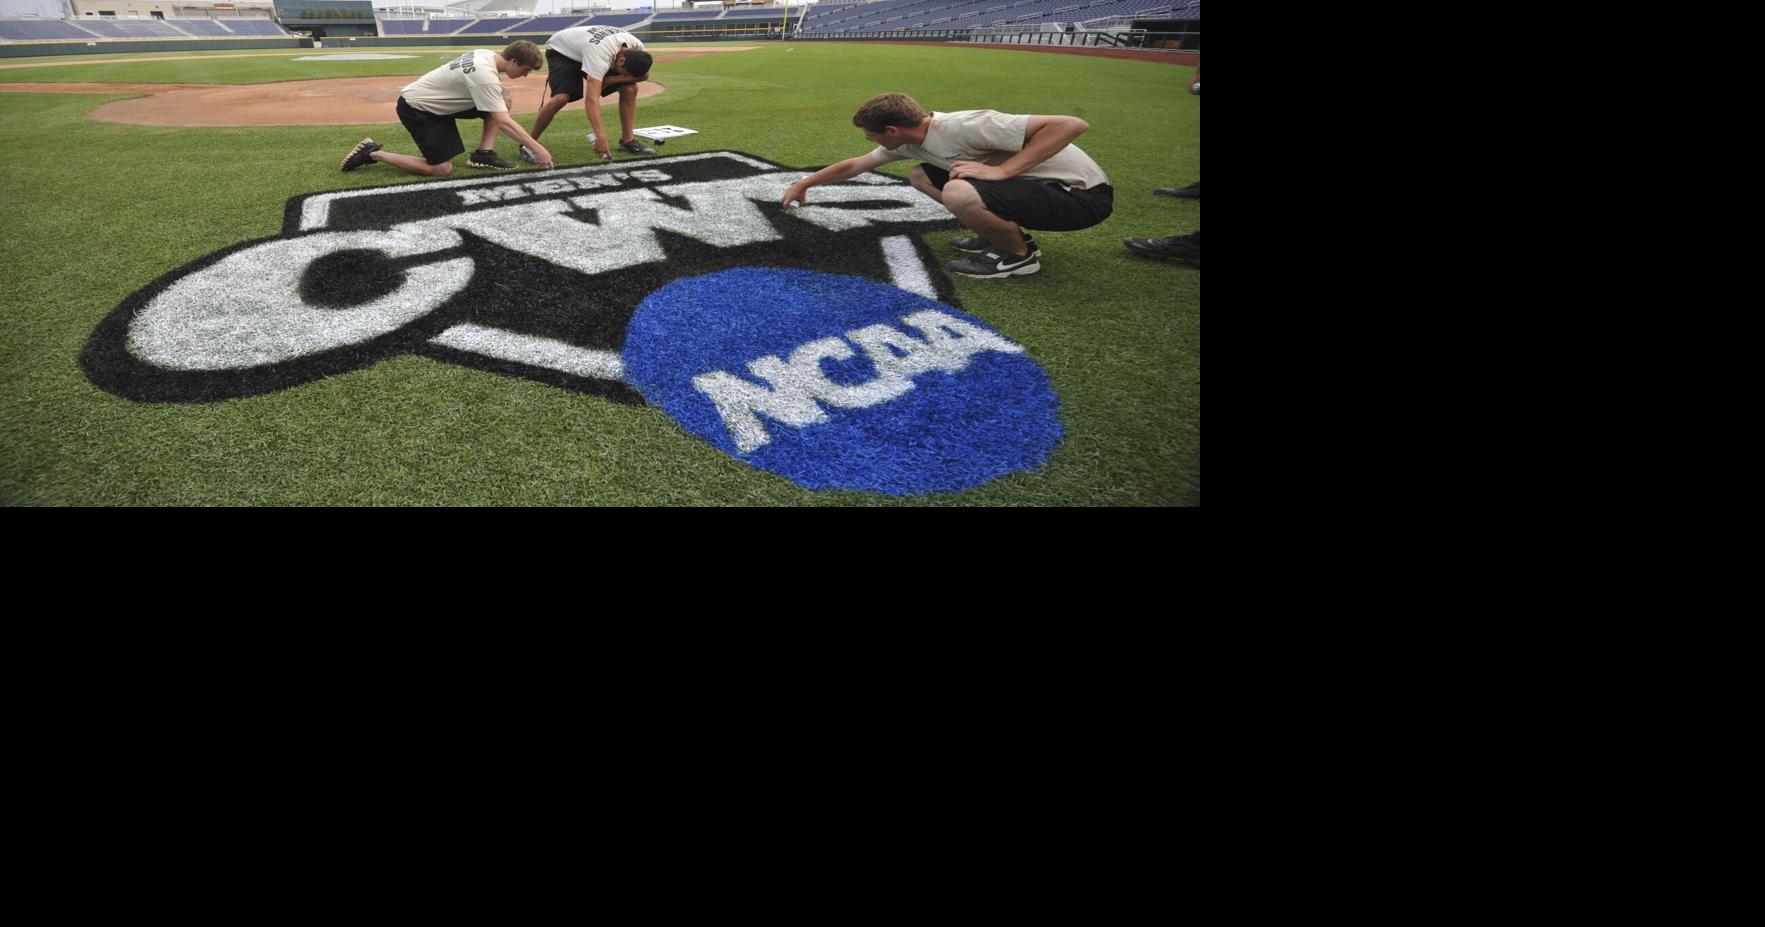 Best College World Series sportsbook promos, bonuses & apps: Over $5,000 in bonuses for CWS in Omaha on Friday